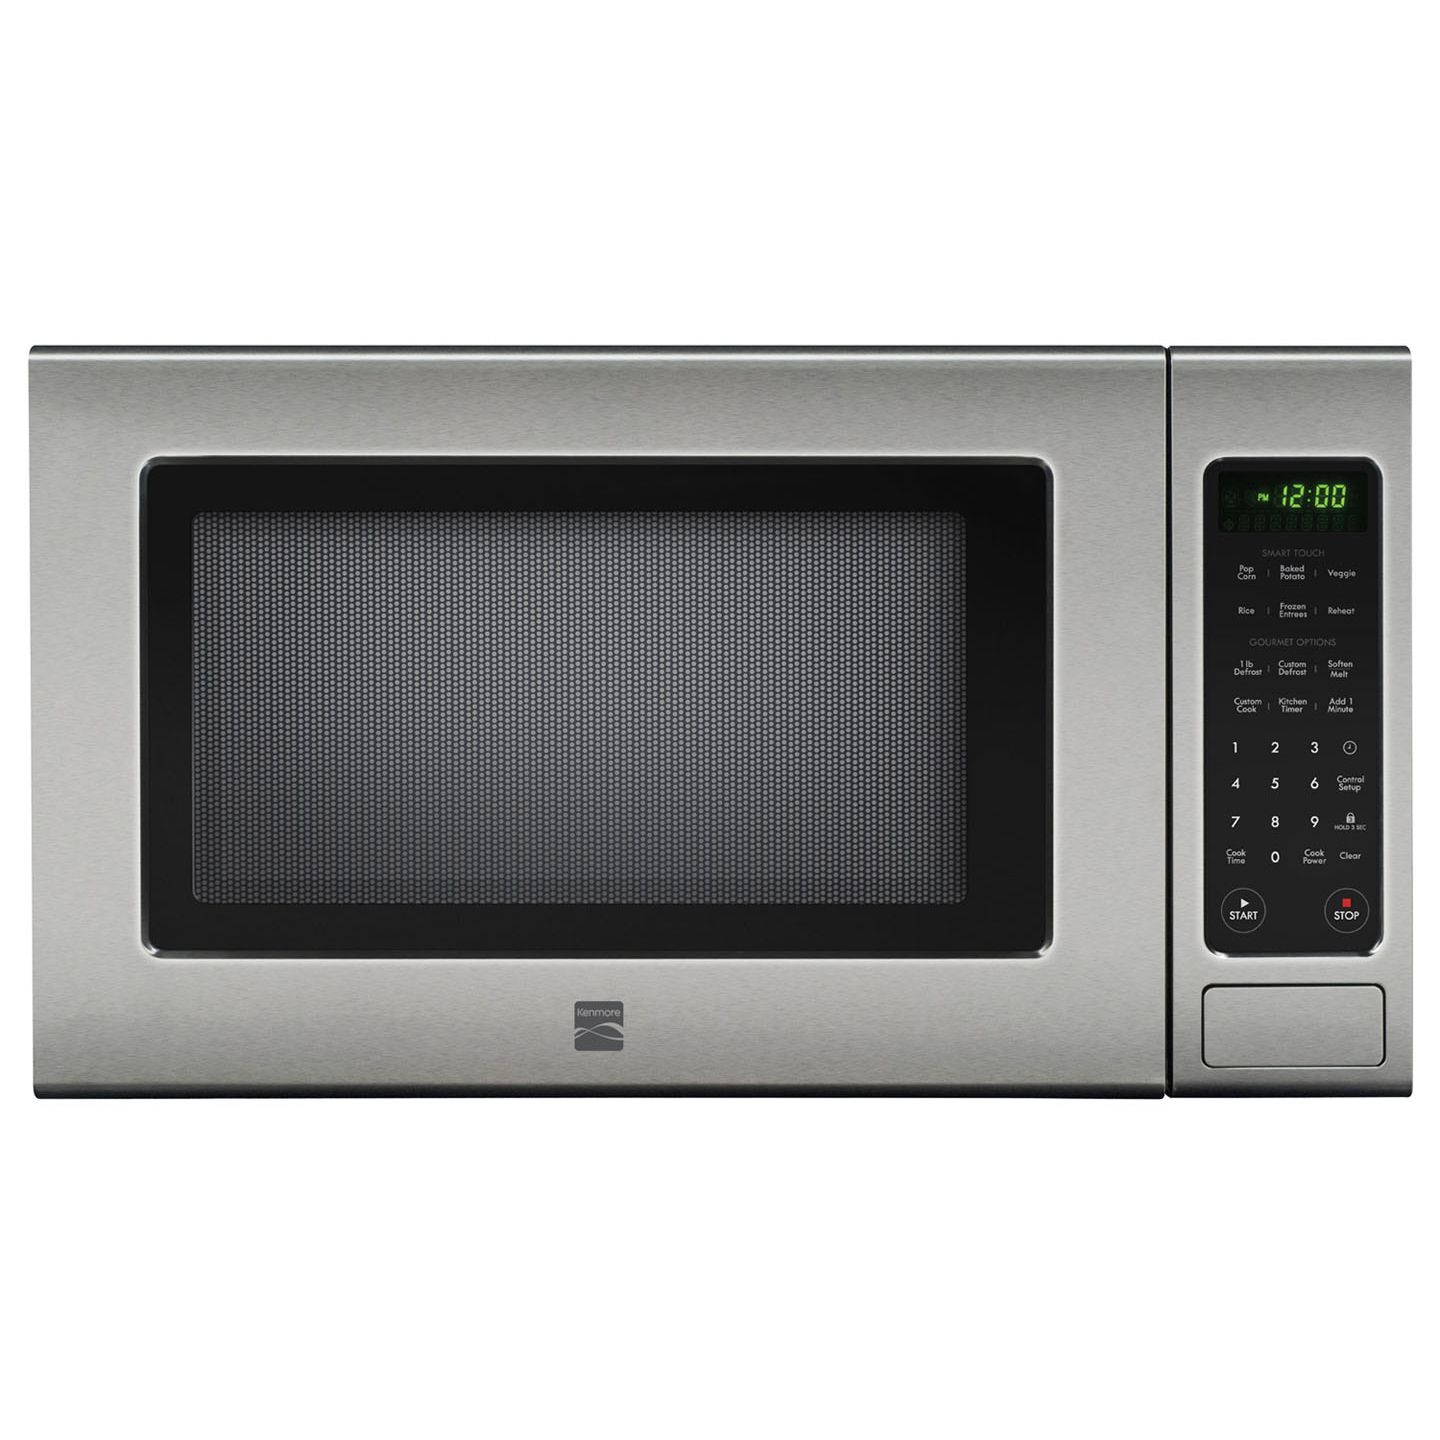 Kenmore 1.2 cu. ft. Countertop Microwave - Stainless Steel | Shop Your